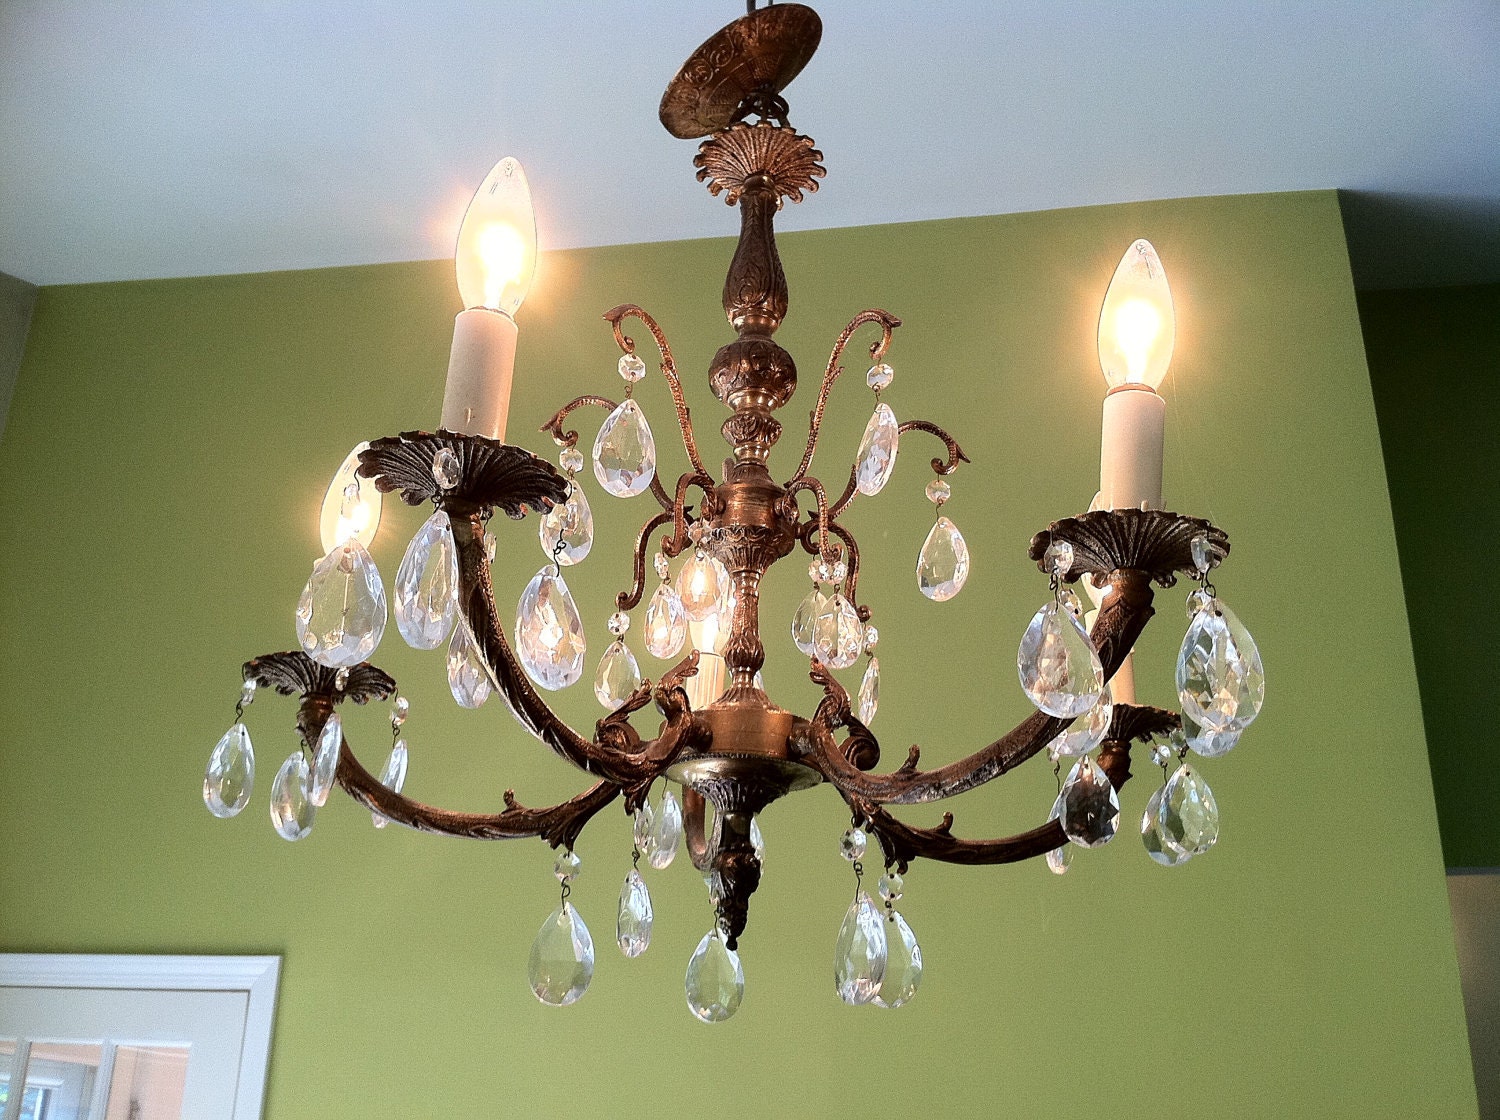 Vintage Crystal and Brass Chandelier Made in Spain by Paisleyteal